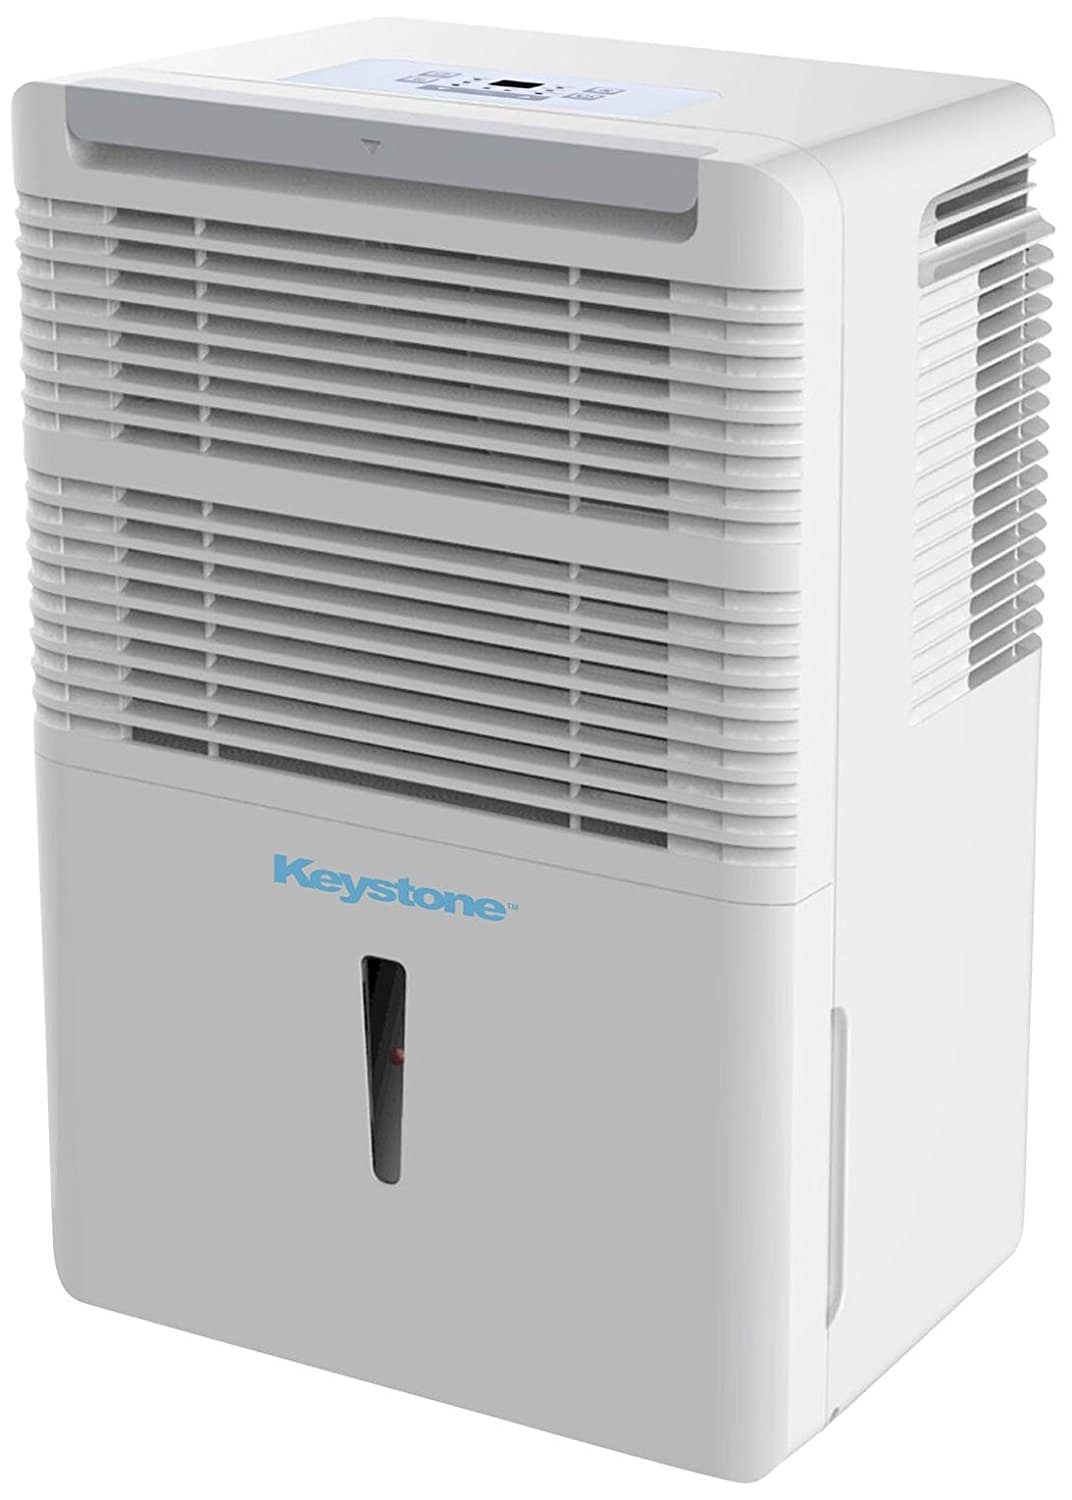 best dehumidifier for basement: you don't have to worry about spending a lot when buying this unit